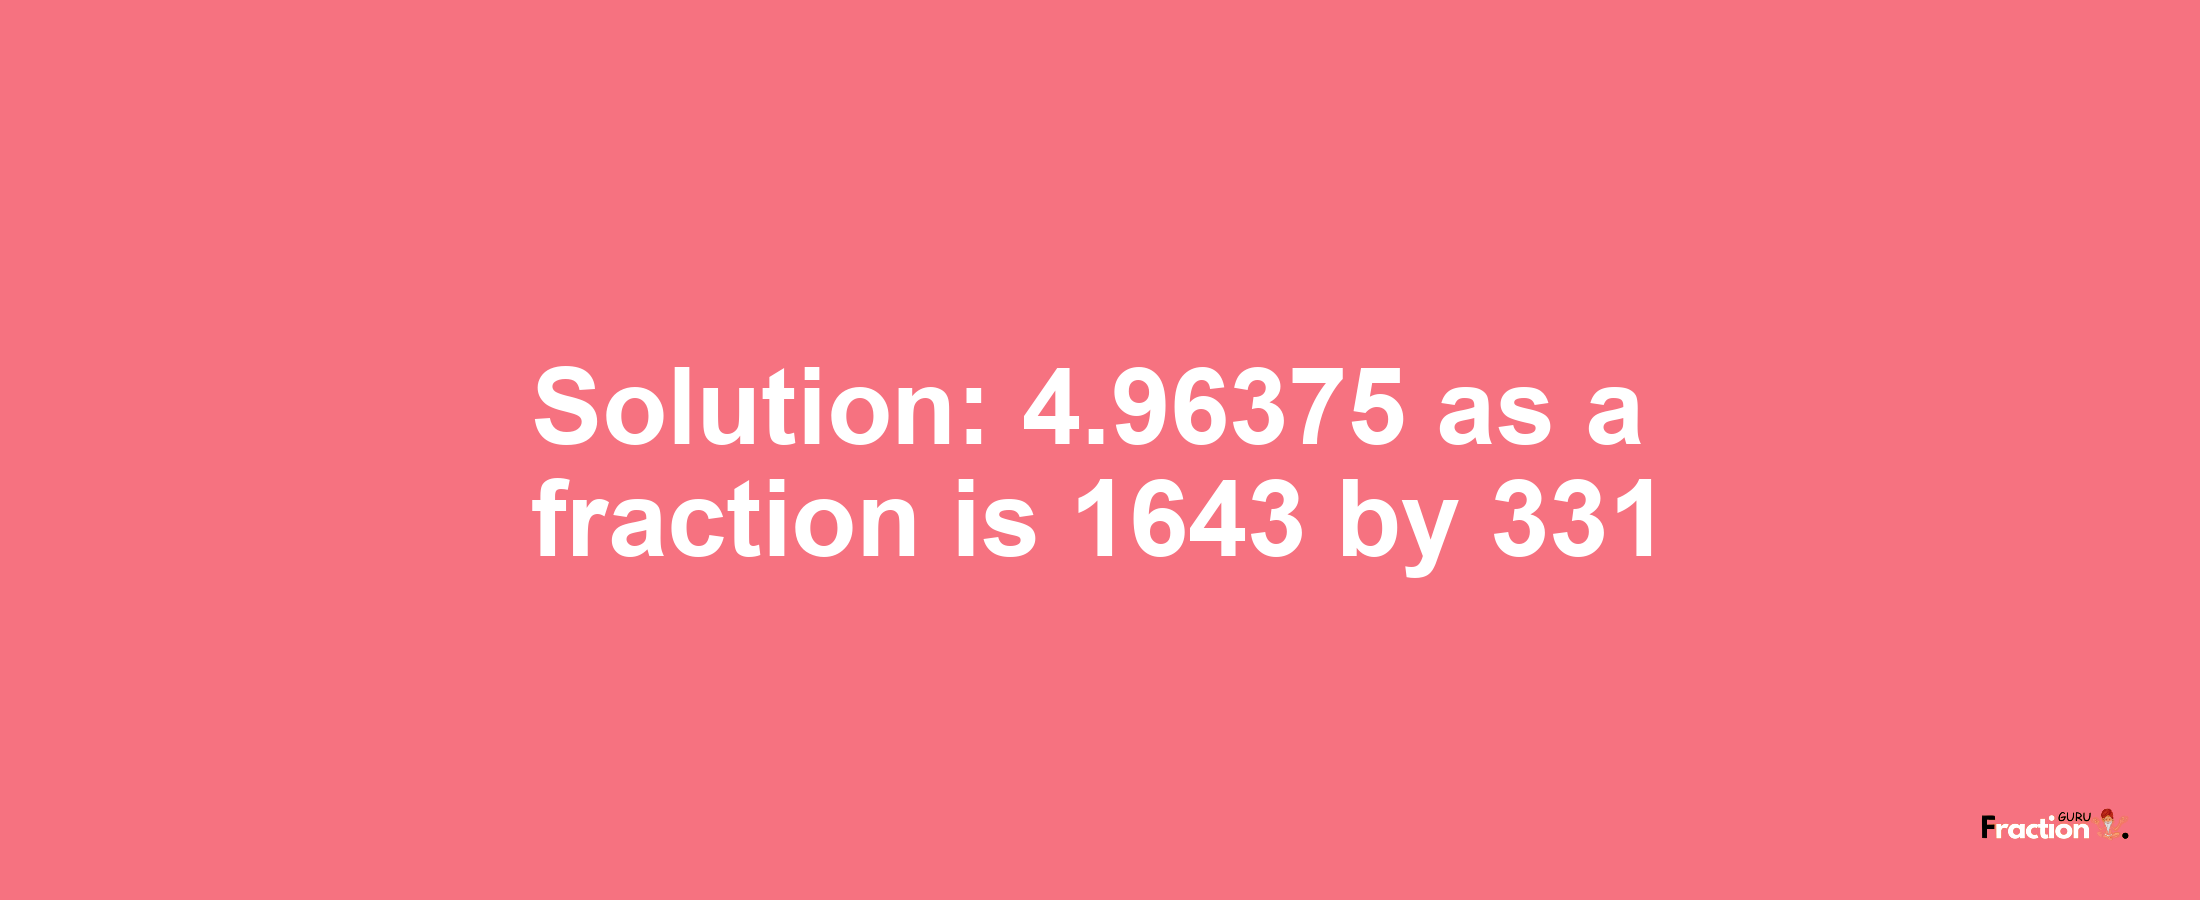 Solution:4.96375 as a fraction is 1643/331